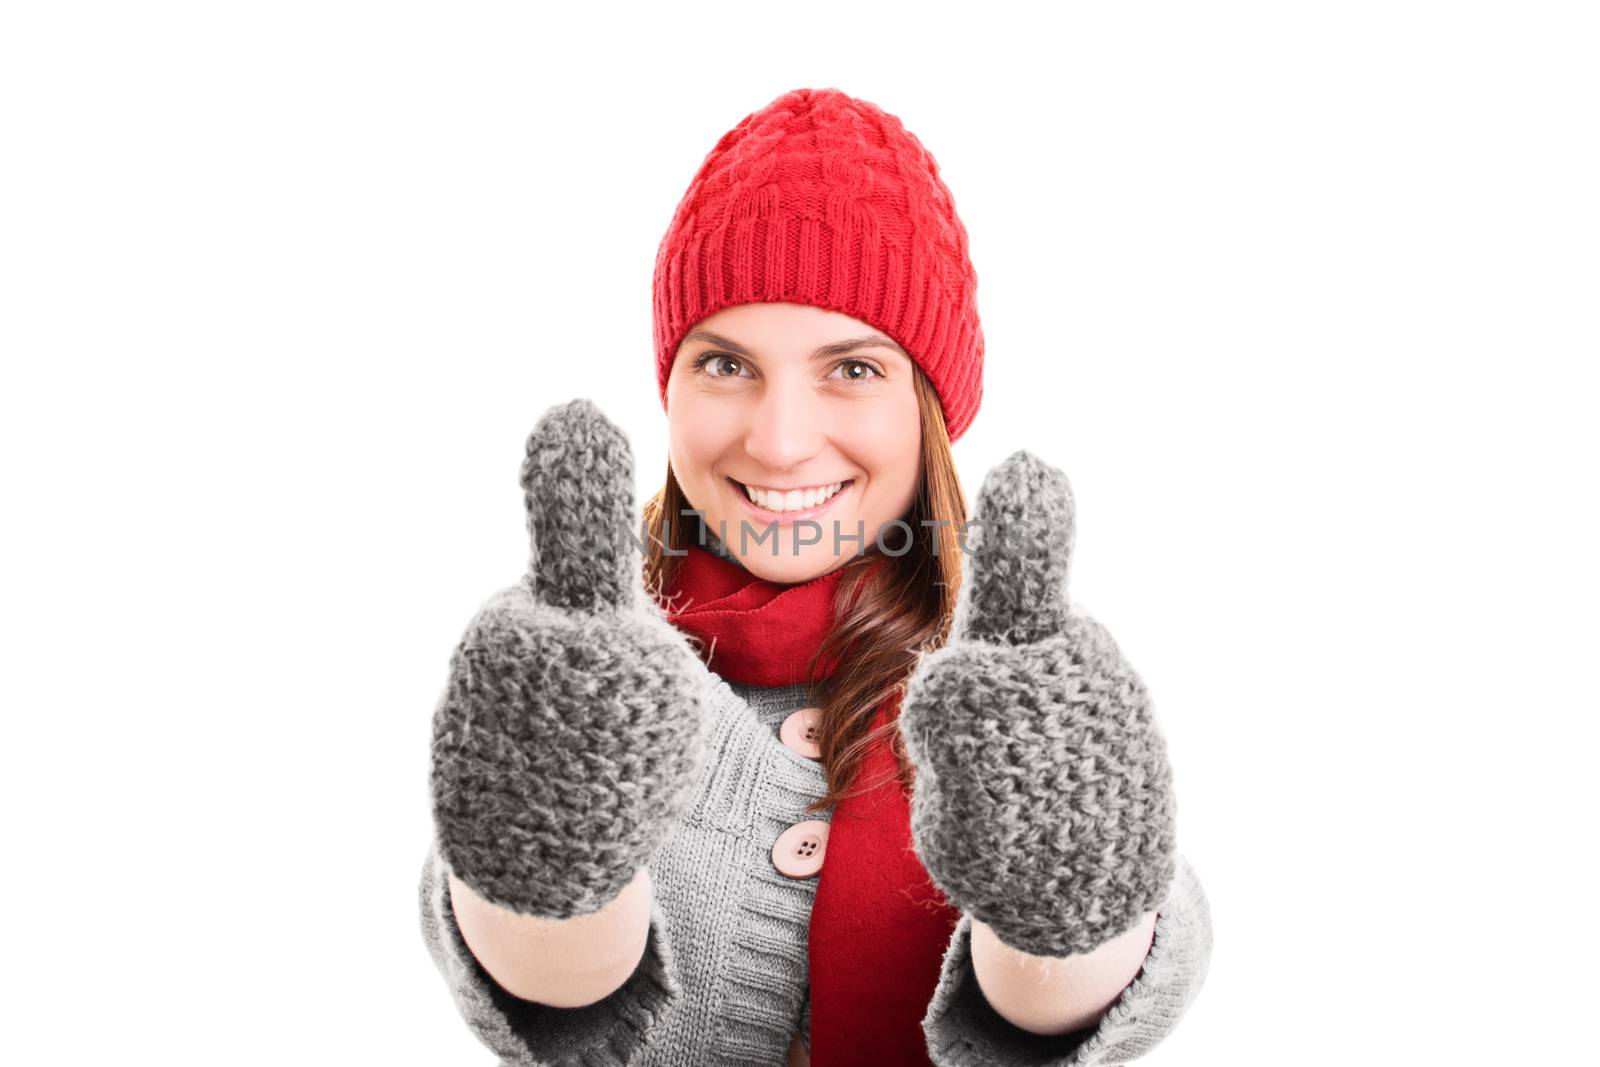 A portrait of a beautiful smiling young girl in winter clothes giving a thumbs up, isolated on white background.